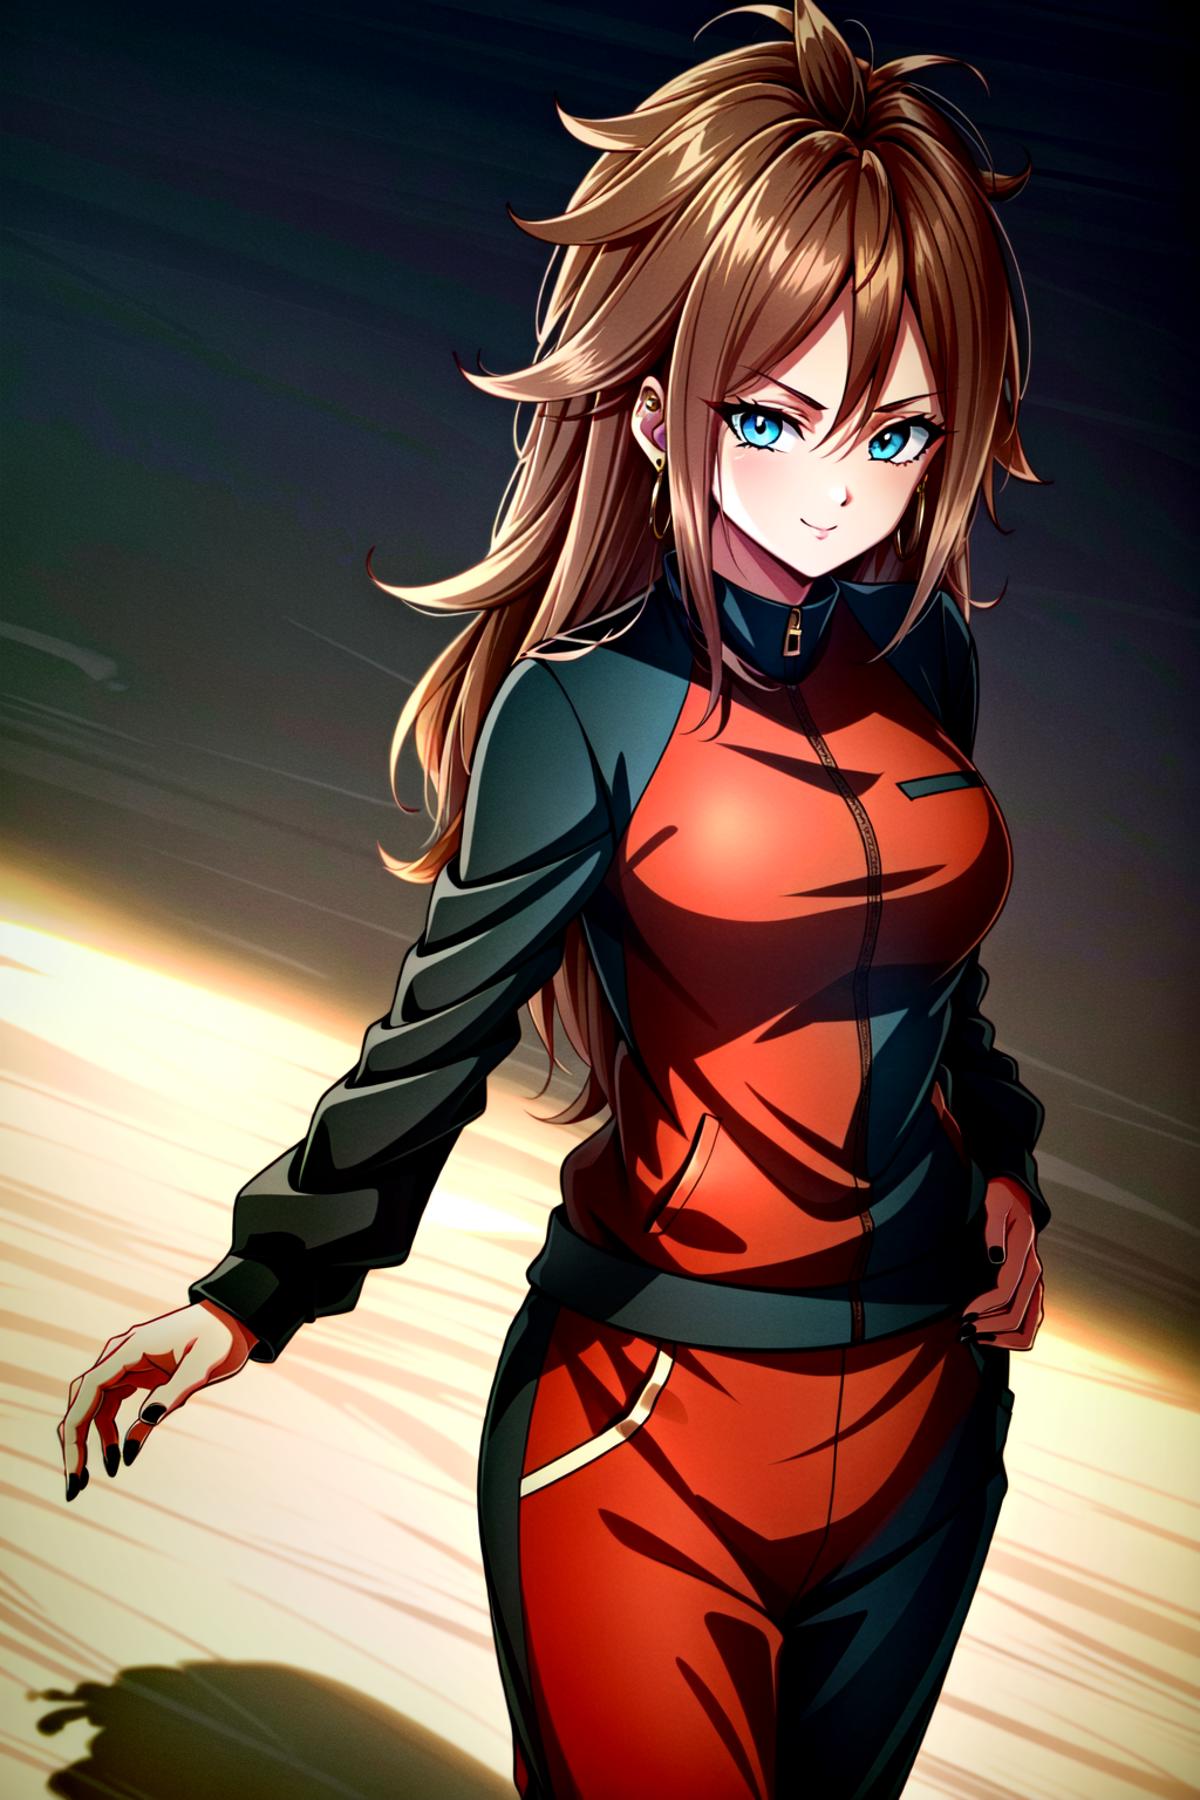 Android 21 x Dragon Ball FighterZ image by OG_Turles